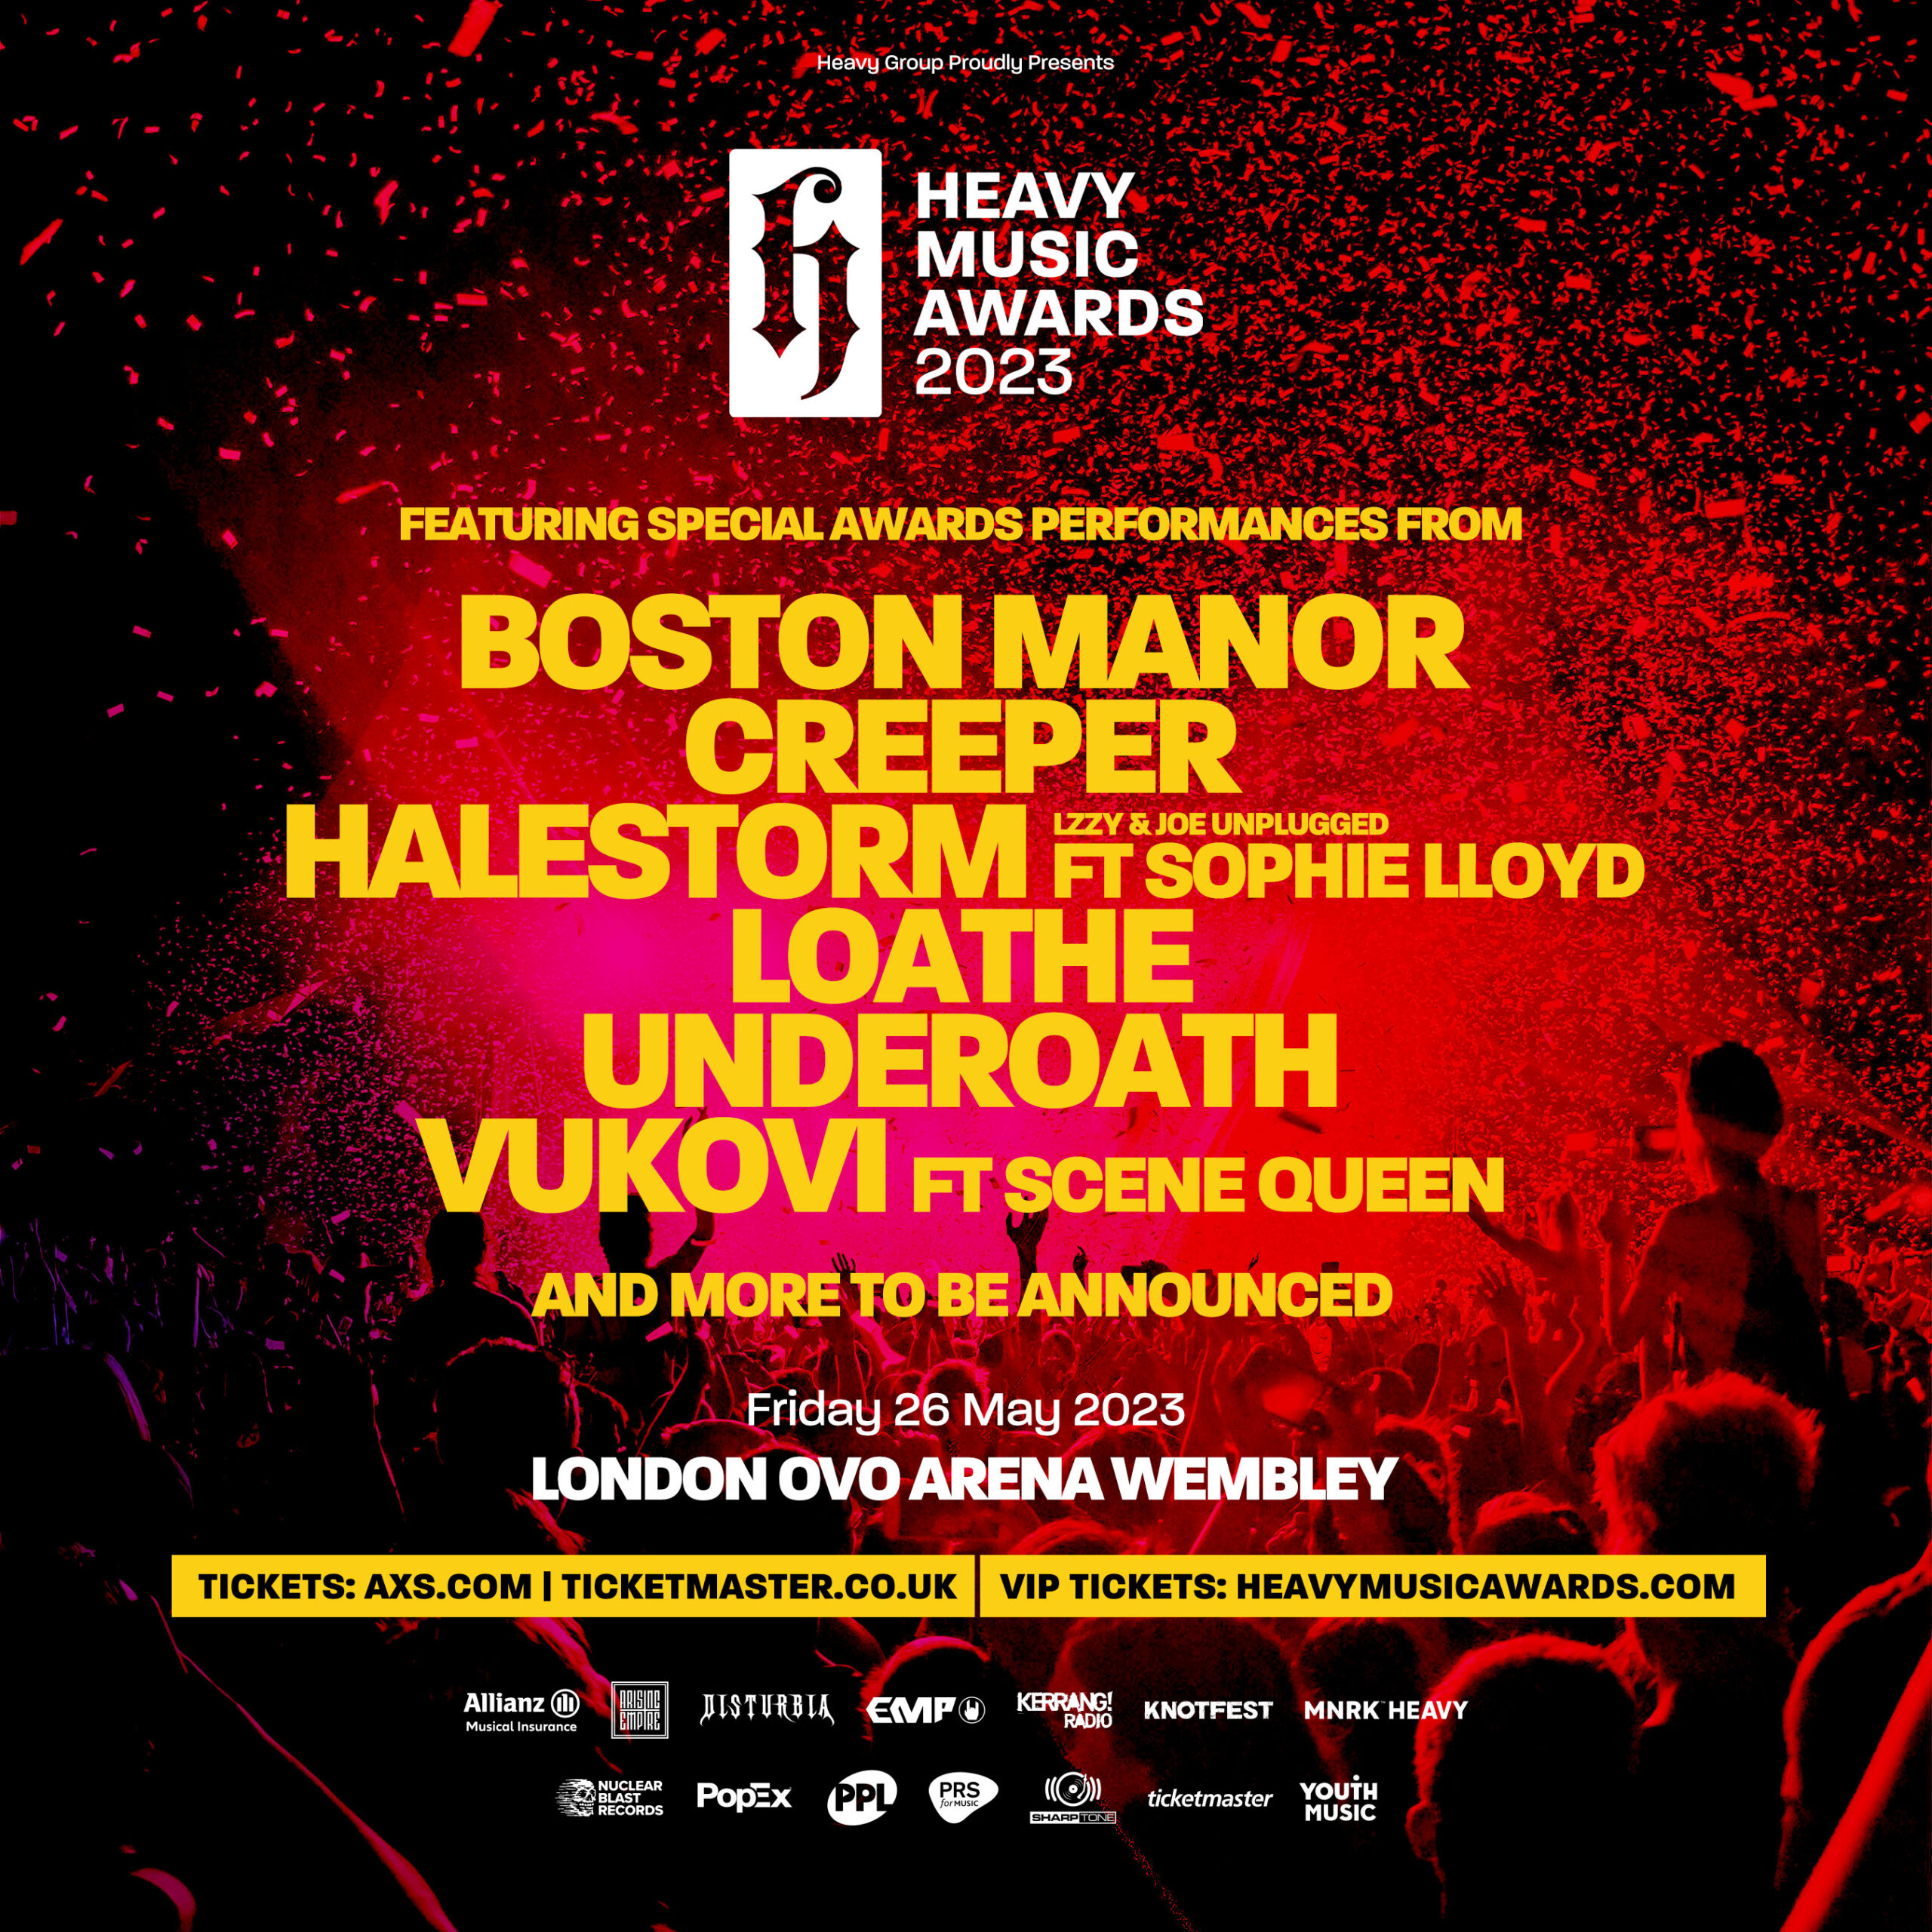 THIS WEEK: Heavy Music Awards 2023